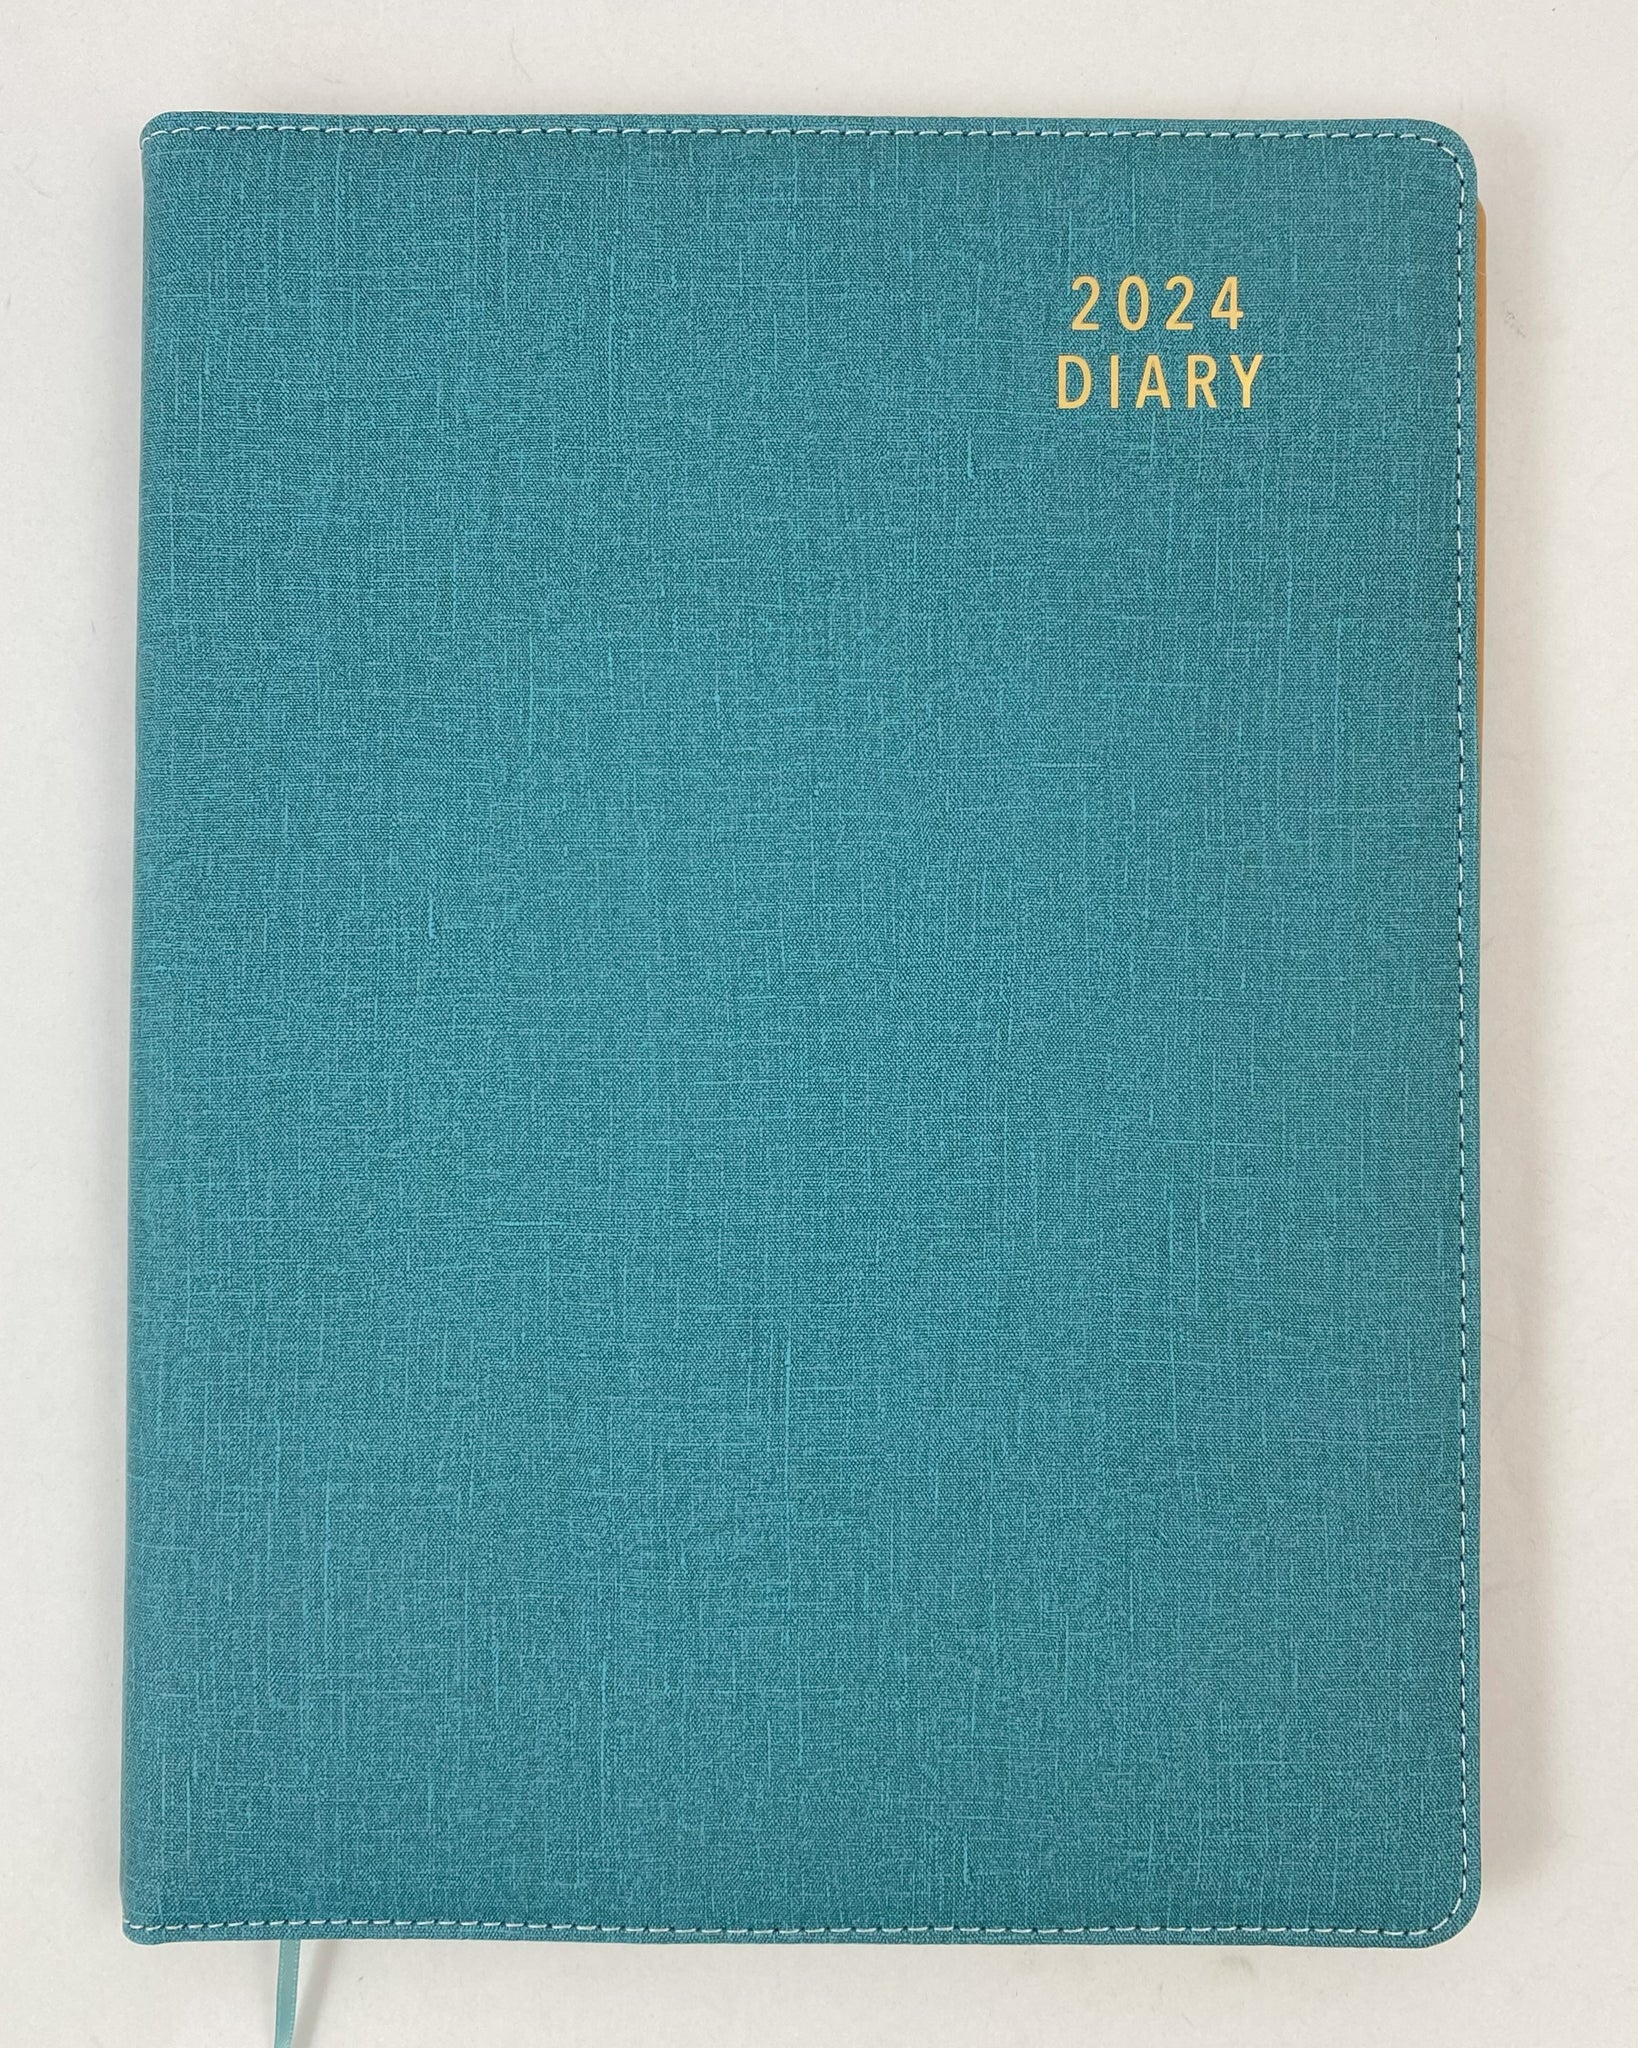 2024 A4 Diary Week to View TEAL 30% OFF